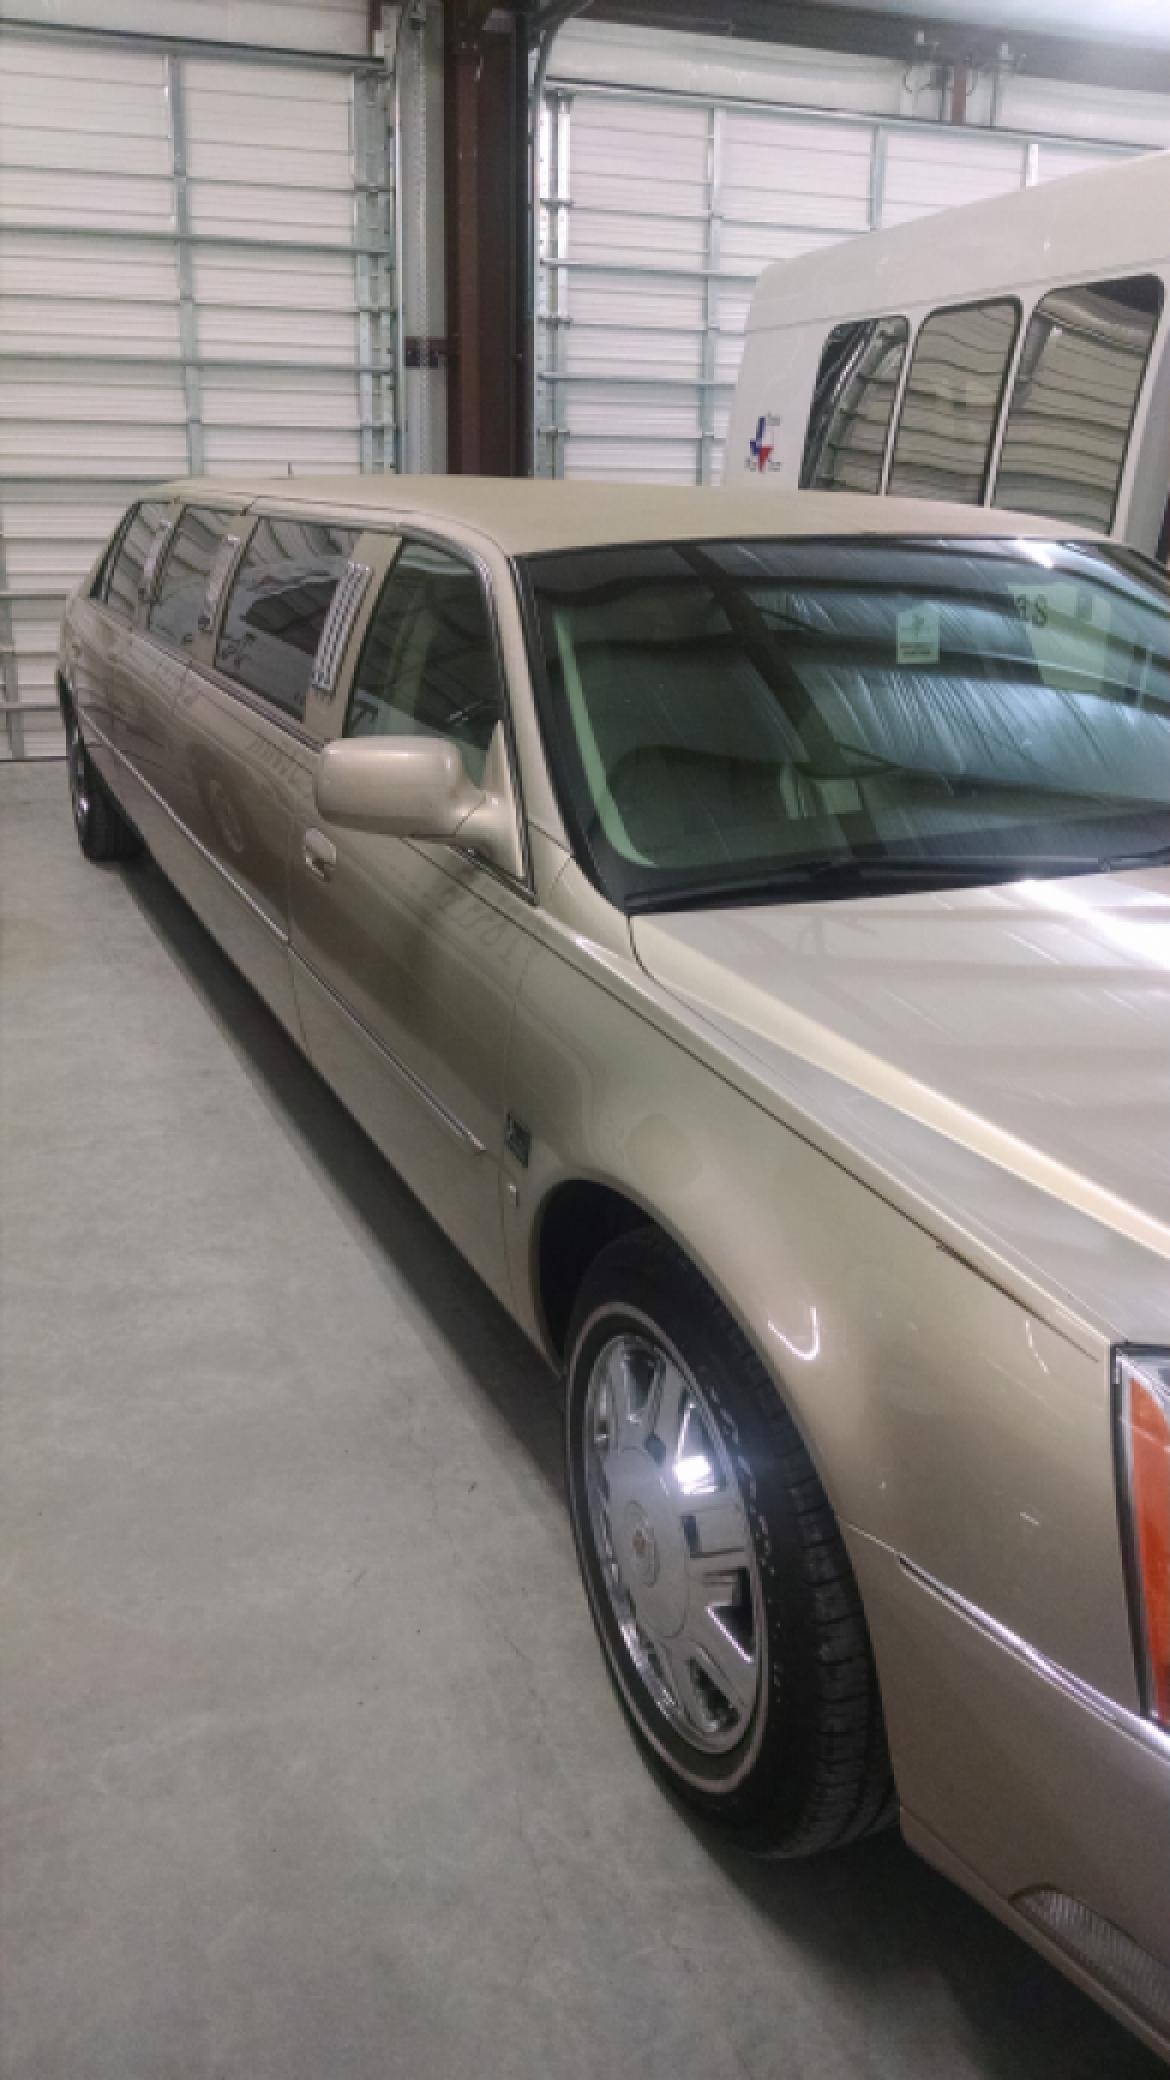 Limousine for sale: 2008 Cadillac DTS by LCW